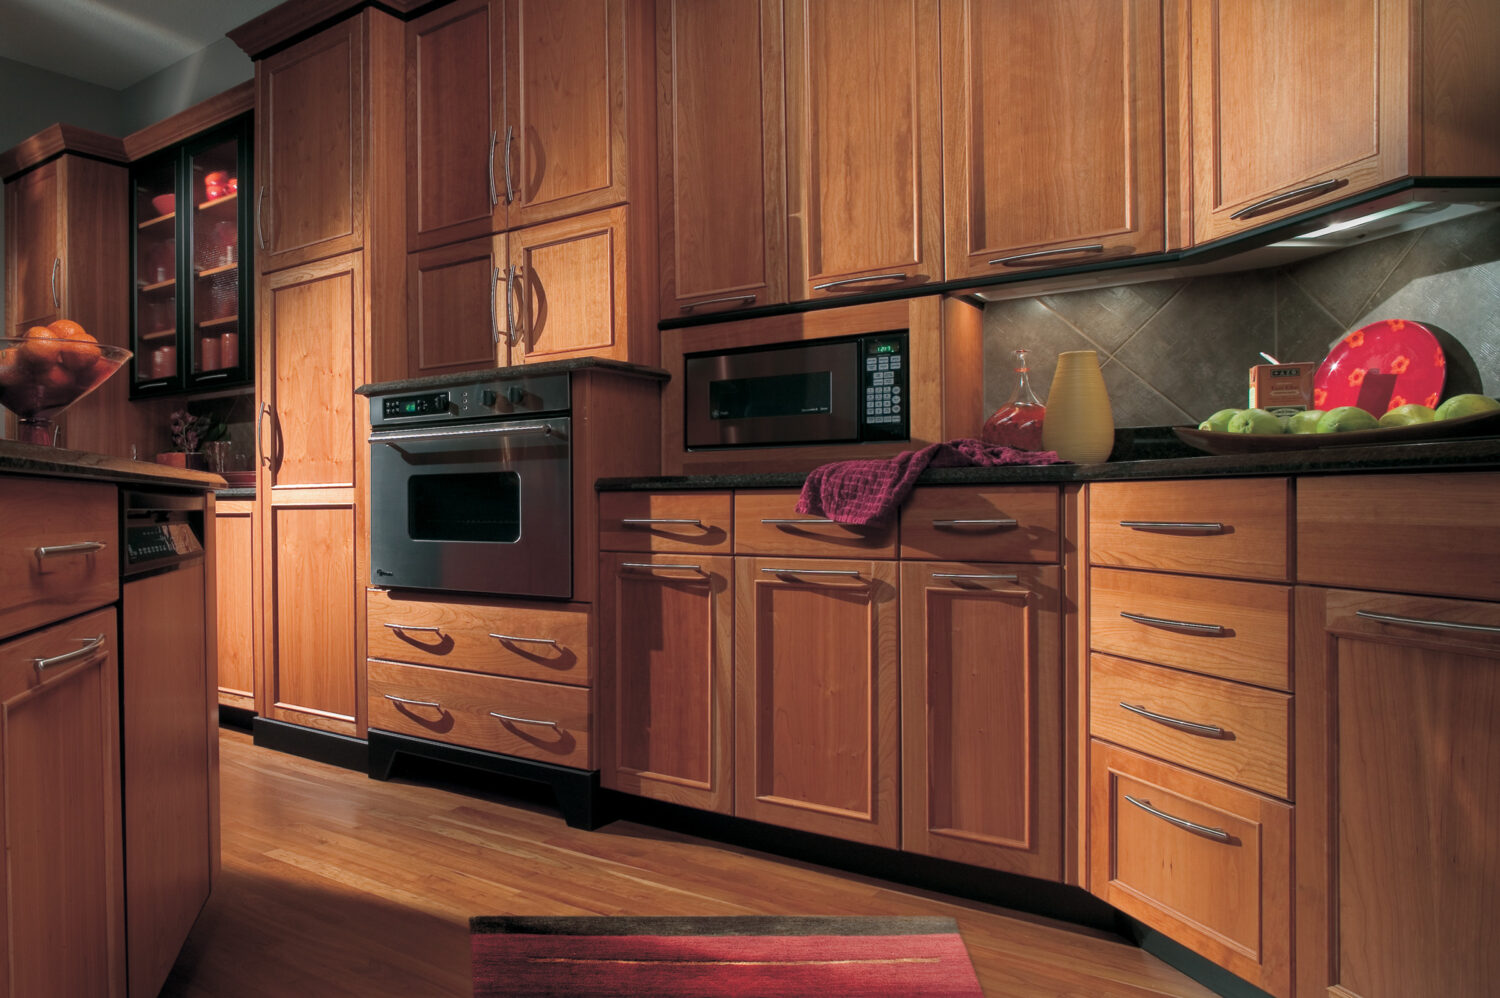 This practical and intelligent cherry wood kitchen design creates cabinetry that performs as beautifully as it looks. This kitchen remodel has a modern style yet maintains a warm cozy color palette.